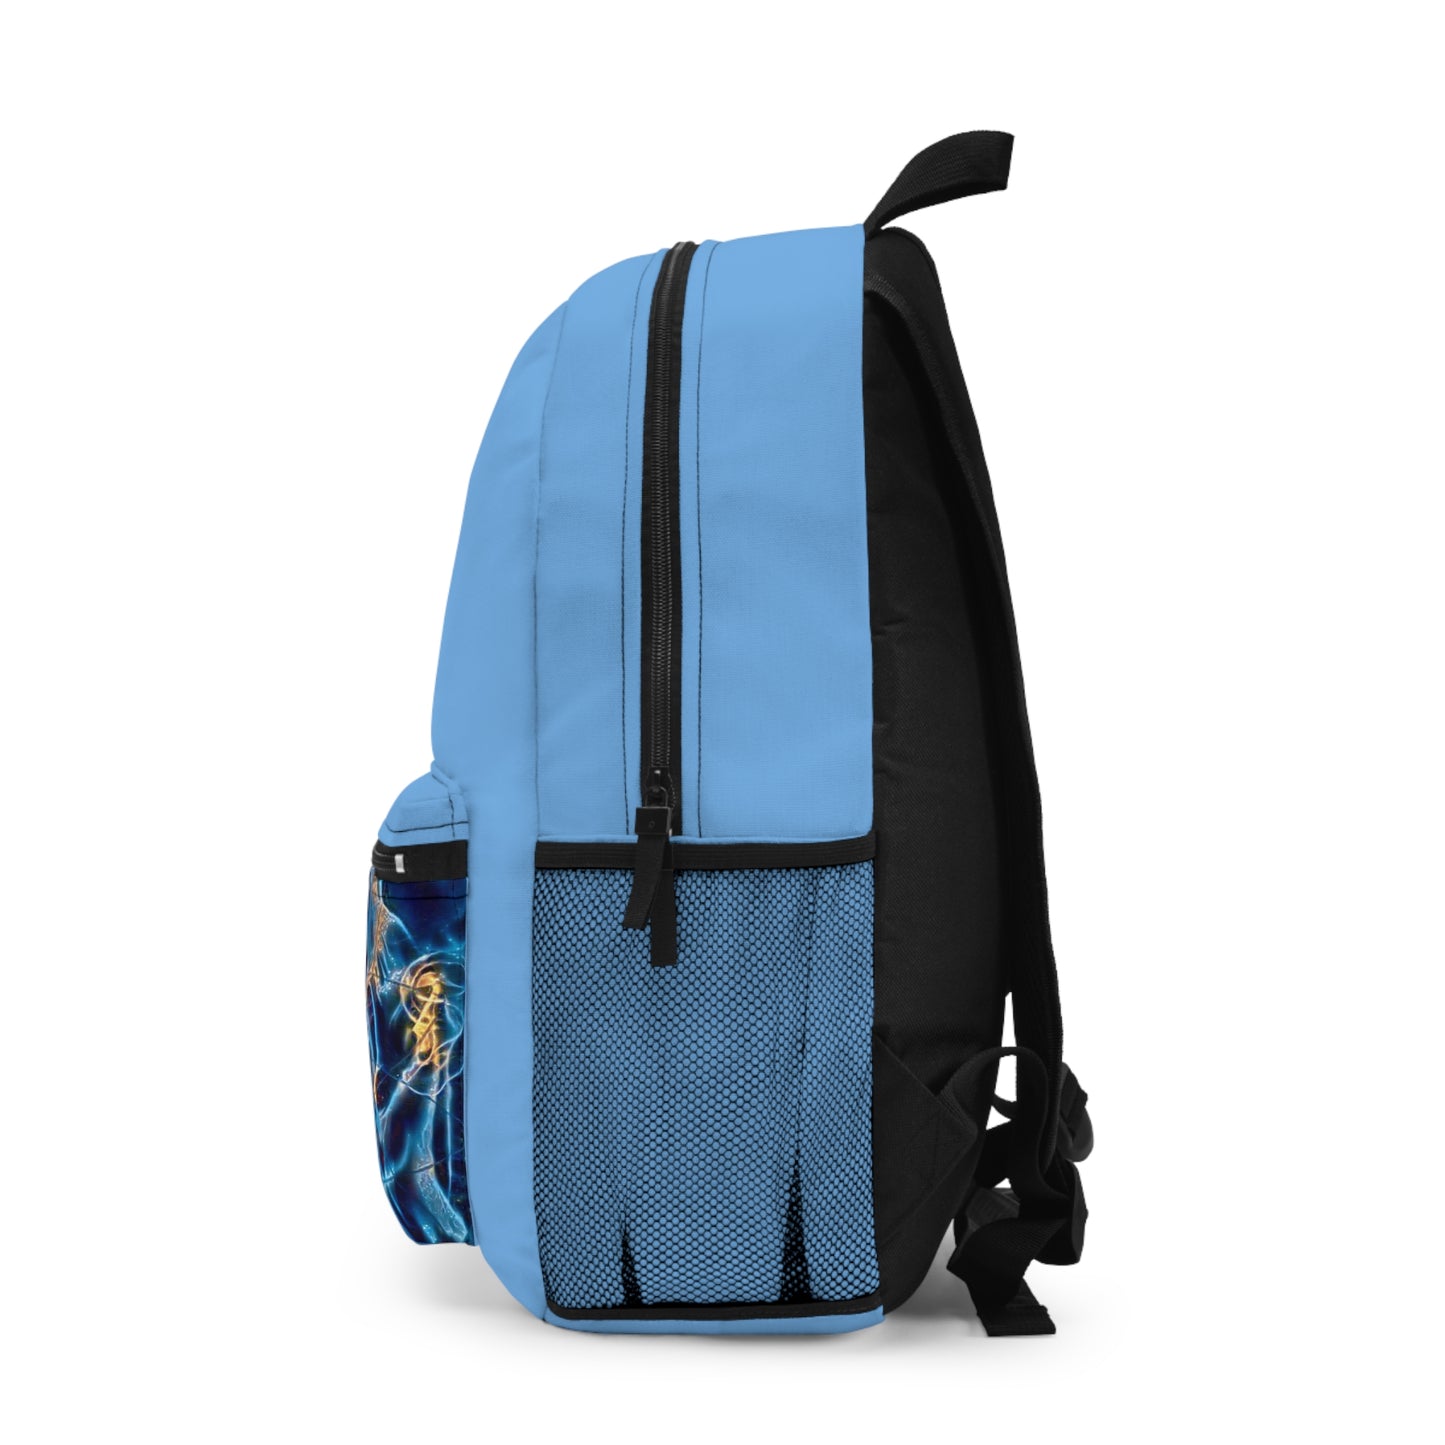 "Mirrors" Backpack